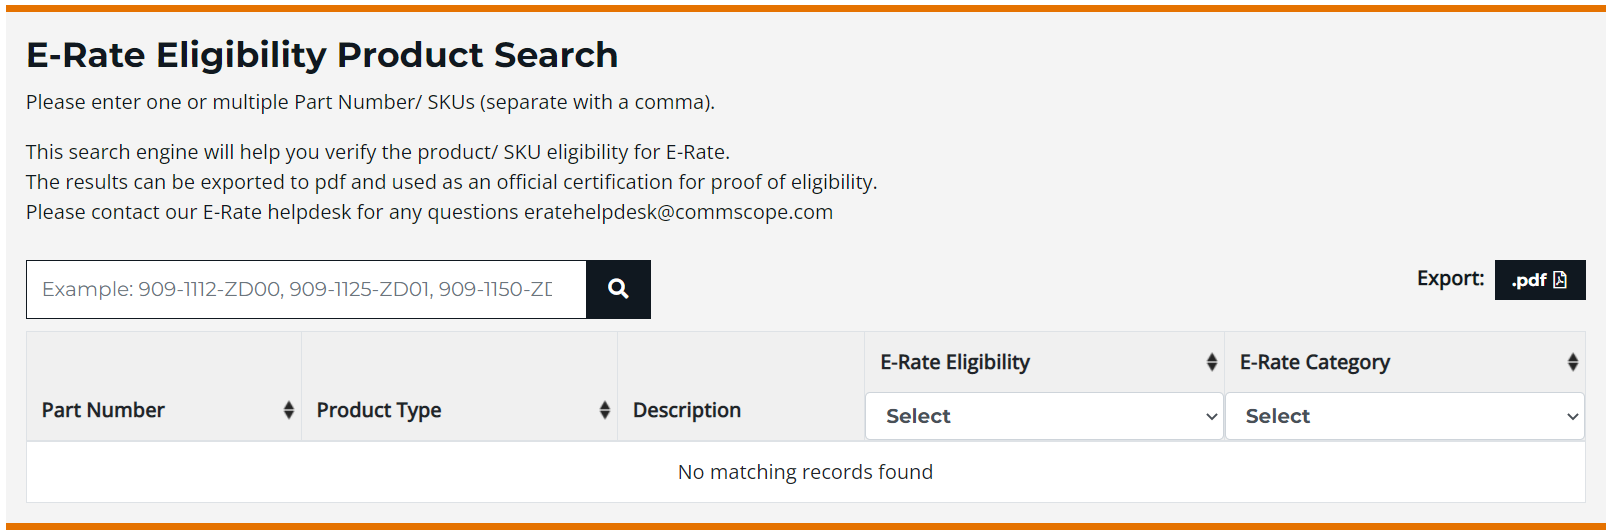 e-rate-eligibility-product-search